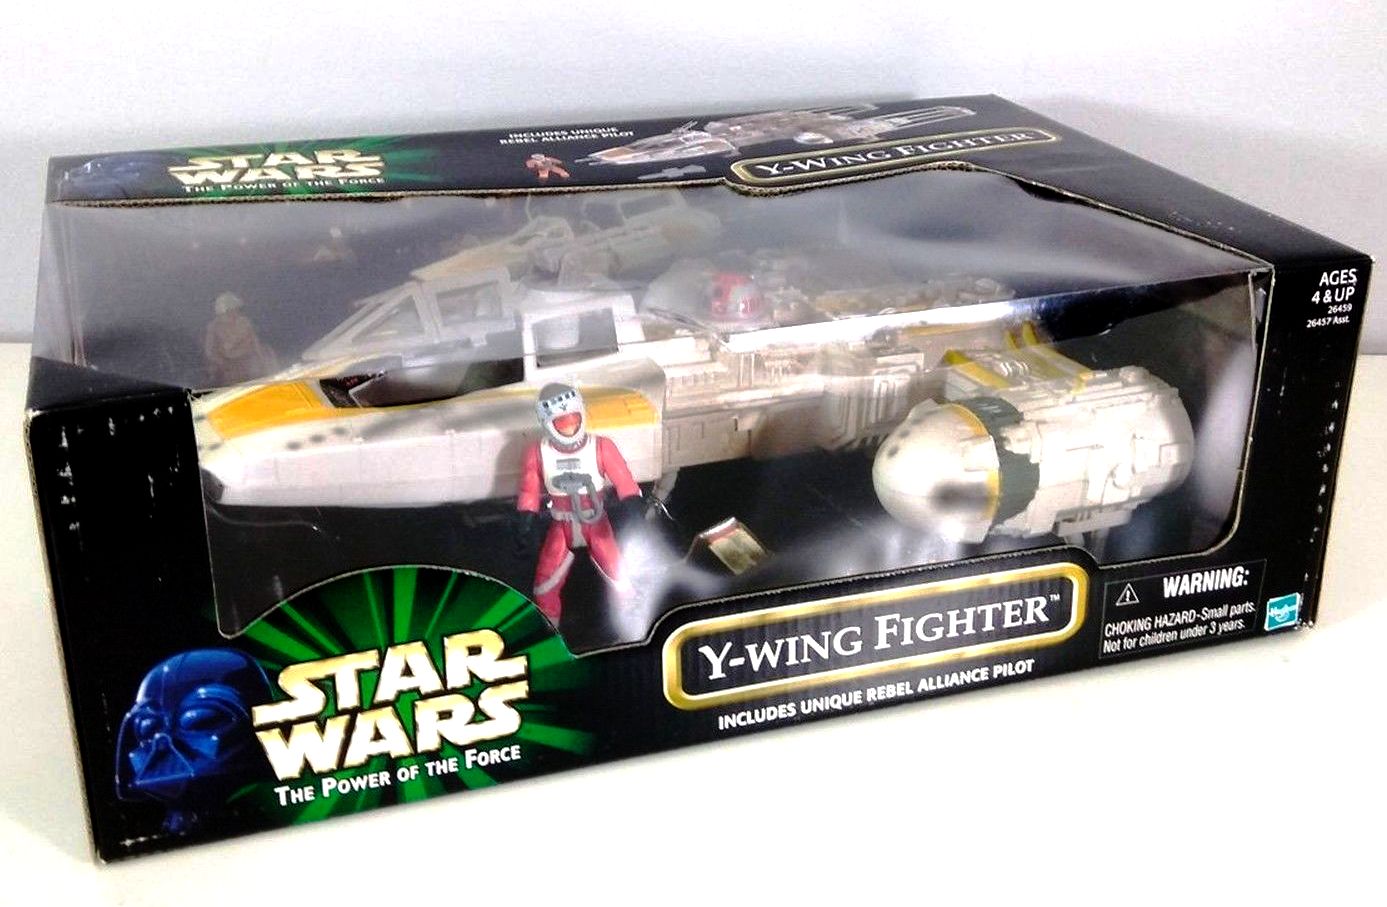 Y-Wing Fighter “w/Unique Rebel Alliance Pilot!” (Star Wars “The 